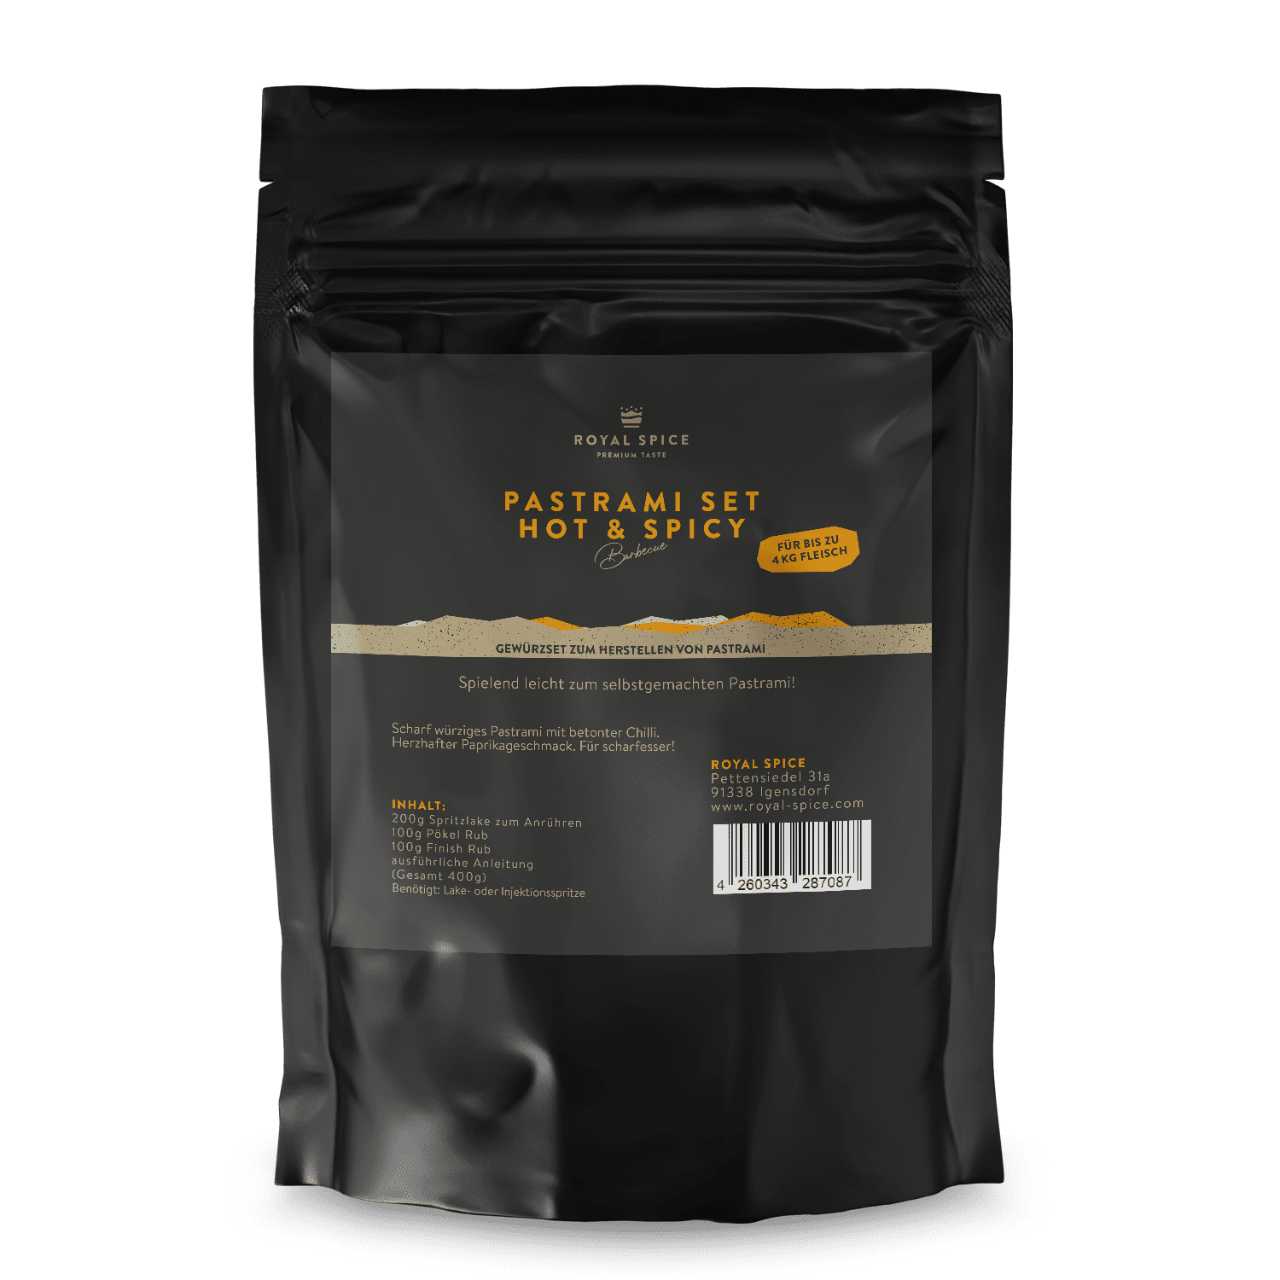 Royal Spice - Pastrami Set Spicy 400g